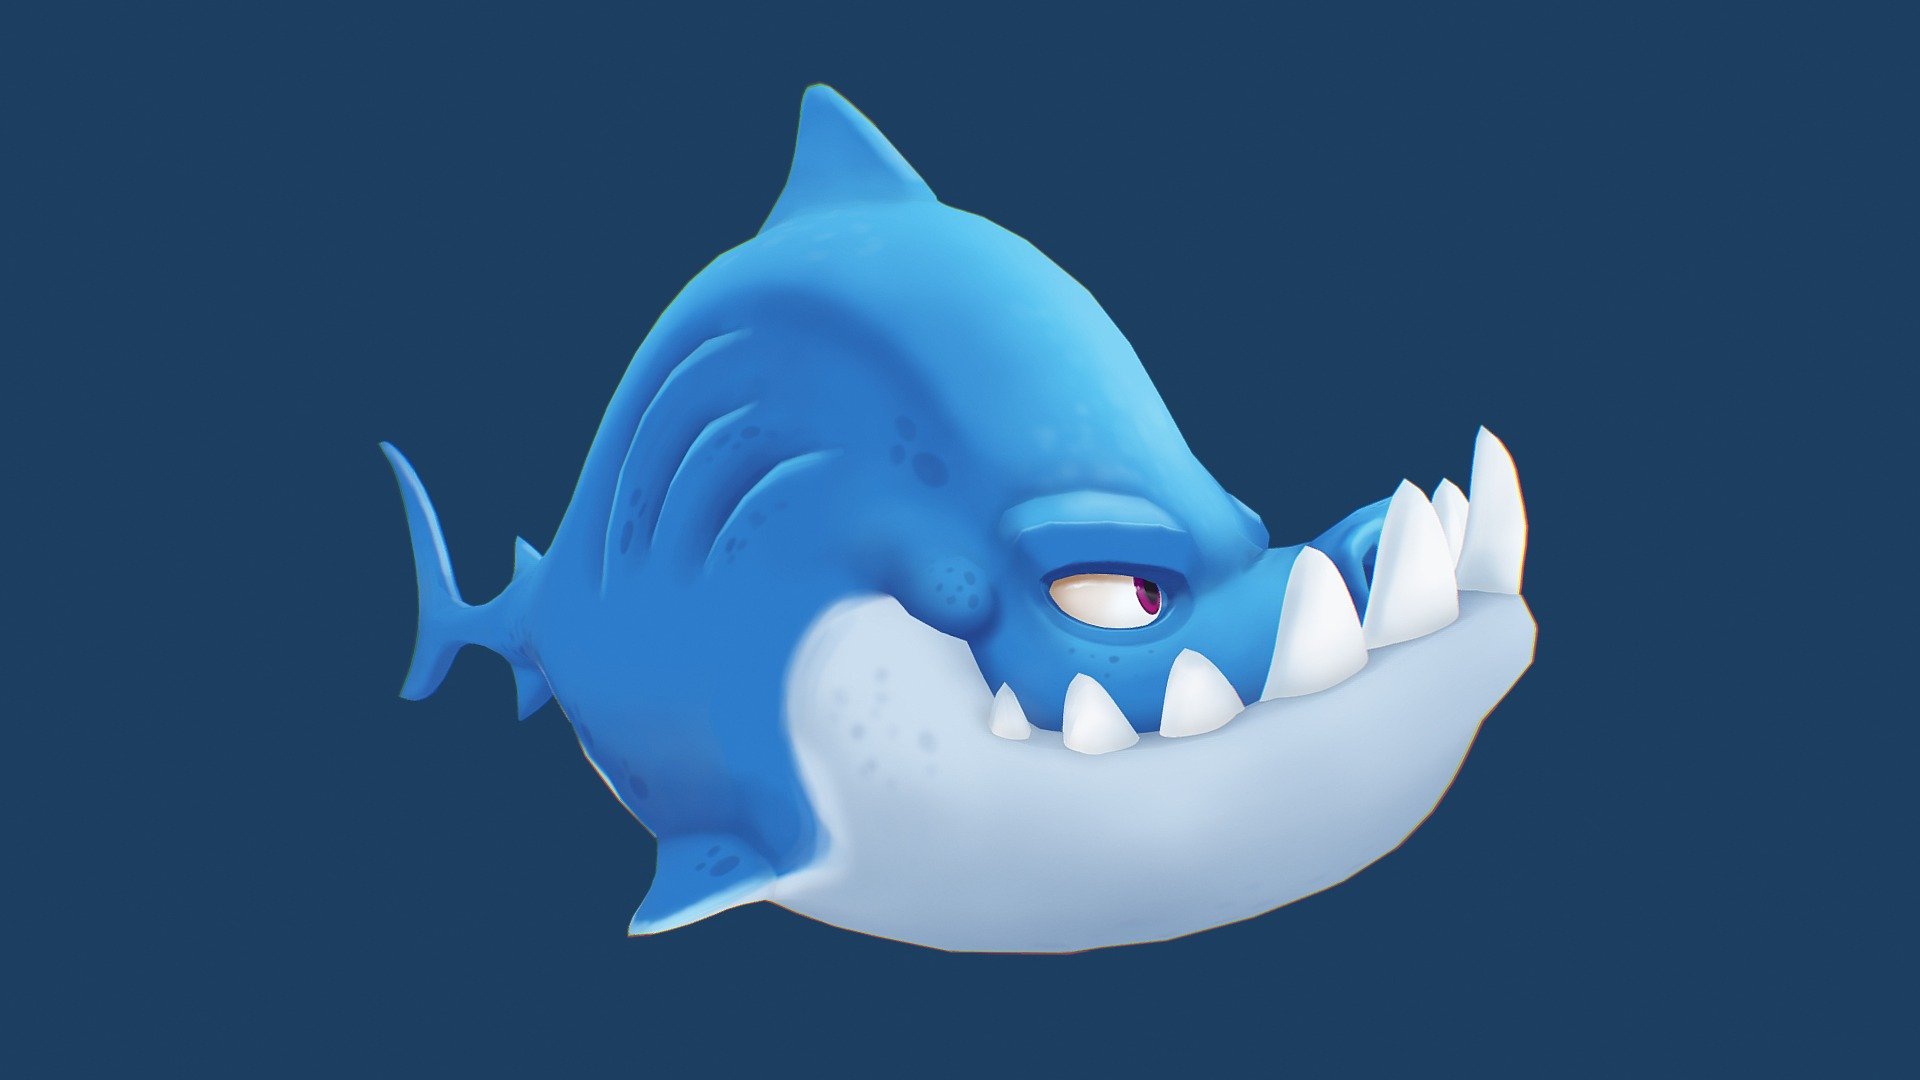 I did the sculpting tutorial on CG Cookie of the shark 
https://cgcookie.com/exercise/sculpting-a-shark 

concept by https://www.instagram.com/veyz_art/?hl=en 

sculpting in Blender 2.8
Retopology and texturing in 3D Coat - Angry Shark - 3D model by Lepler 3d model